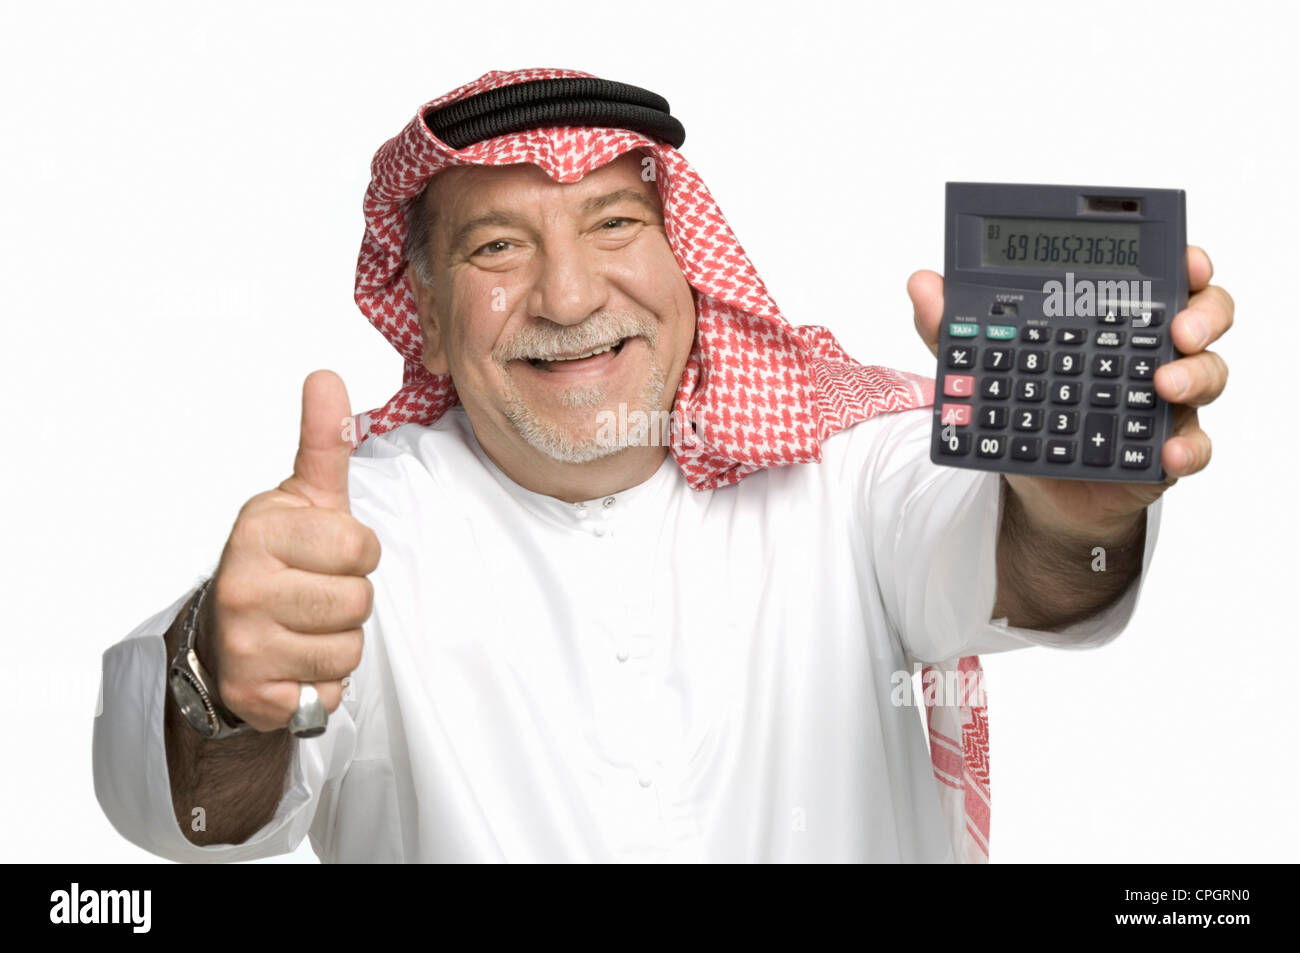 Mature man holding calculator, showing thumbs up, portrait Stock Photo